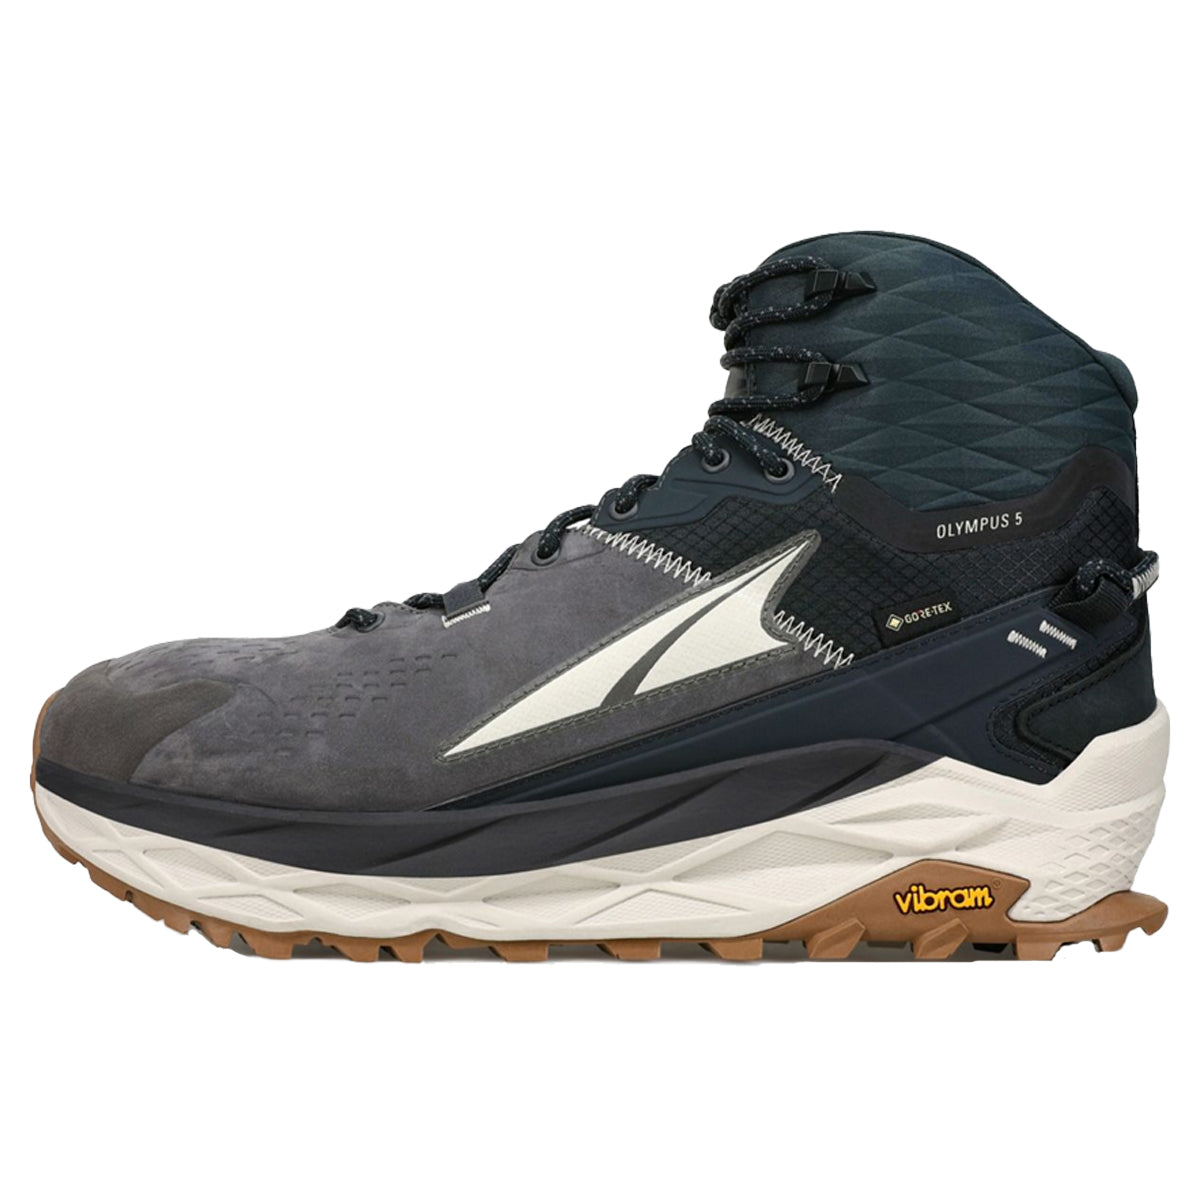 Altra Olympus 5 Hike Mid GTX in Black & Gray by GOHUNT | Altra - GOHUNT Shop